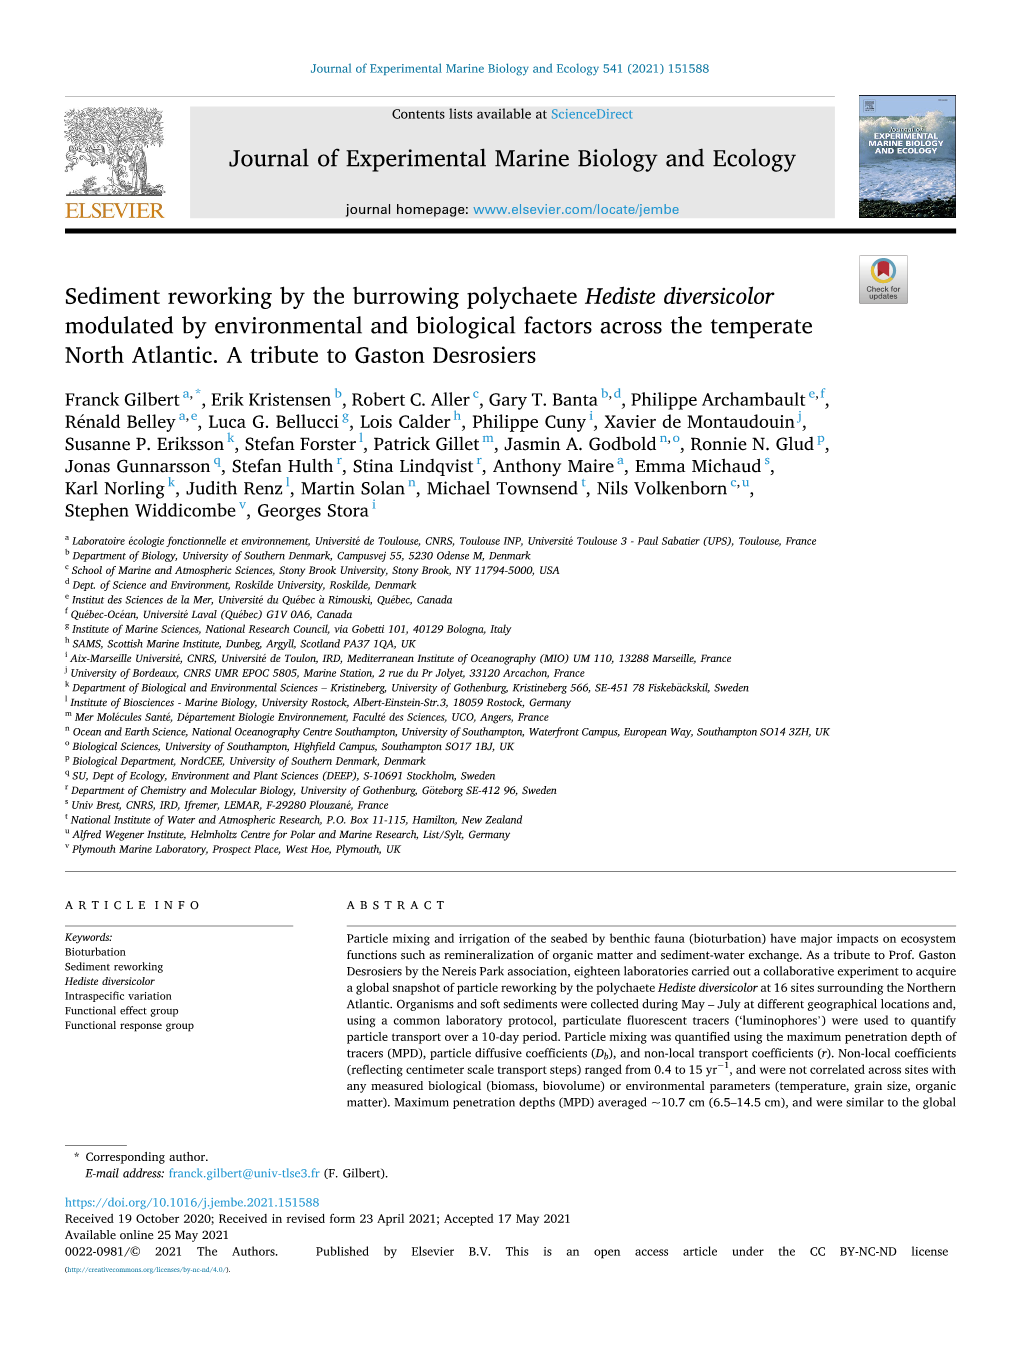 Sediment Reworking by the Burrowing Polychaete Hediste Diversicolor Modulated by Environmental and Biological Factors Across the Temperate North Atlantic